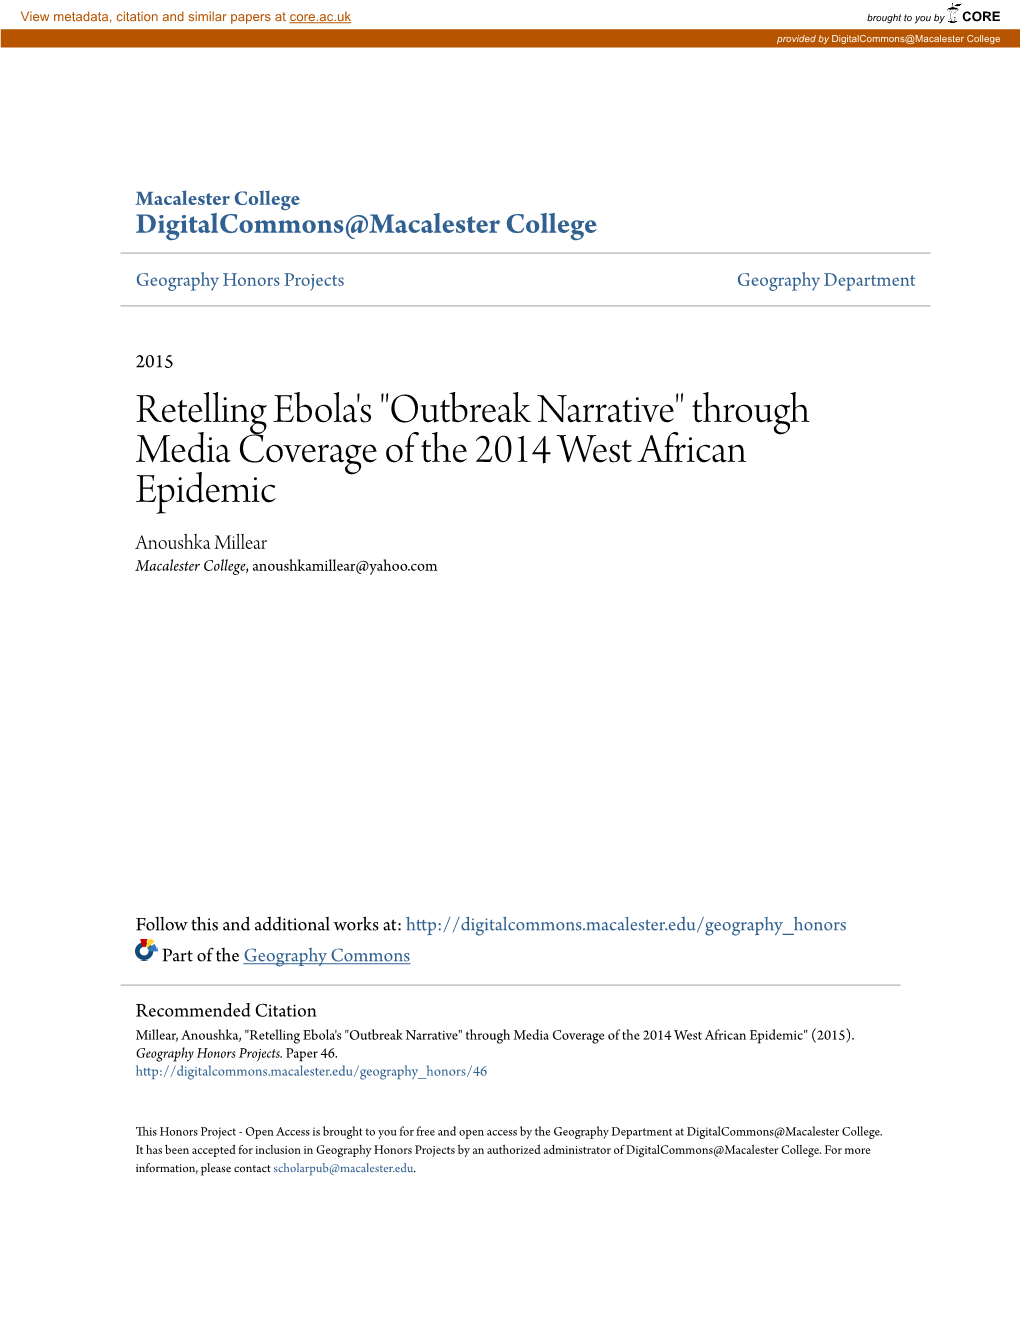 Outbreak Narrative" Through Media Coverage of the 2014 West African Epidemic Anoushka Millear Macalester College, Anoushkamillear@Yahoo.Com